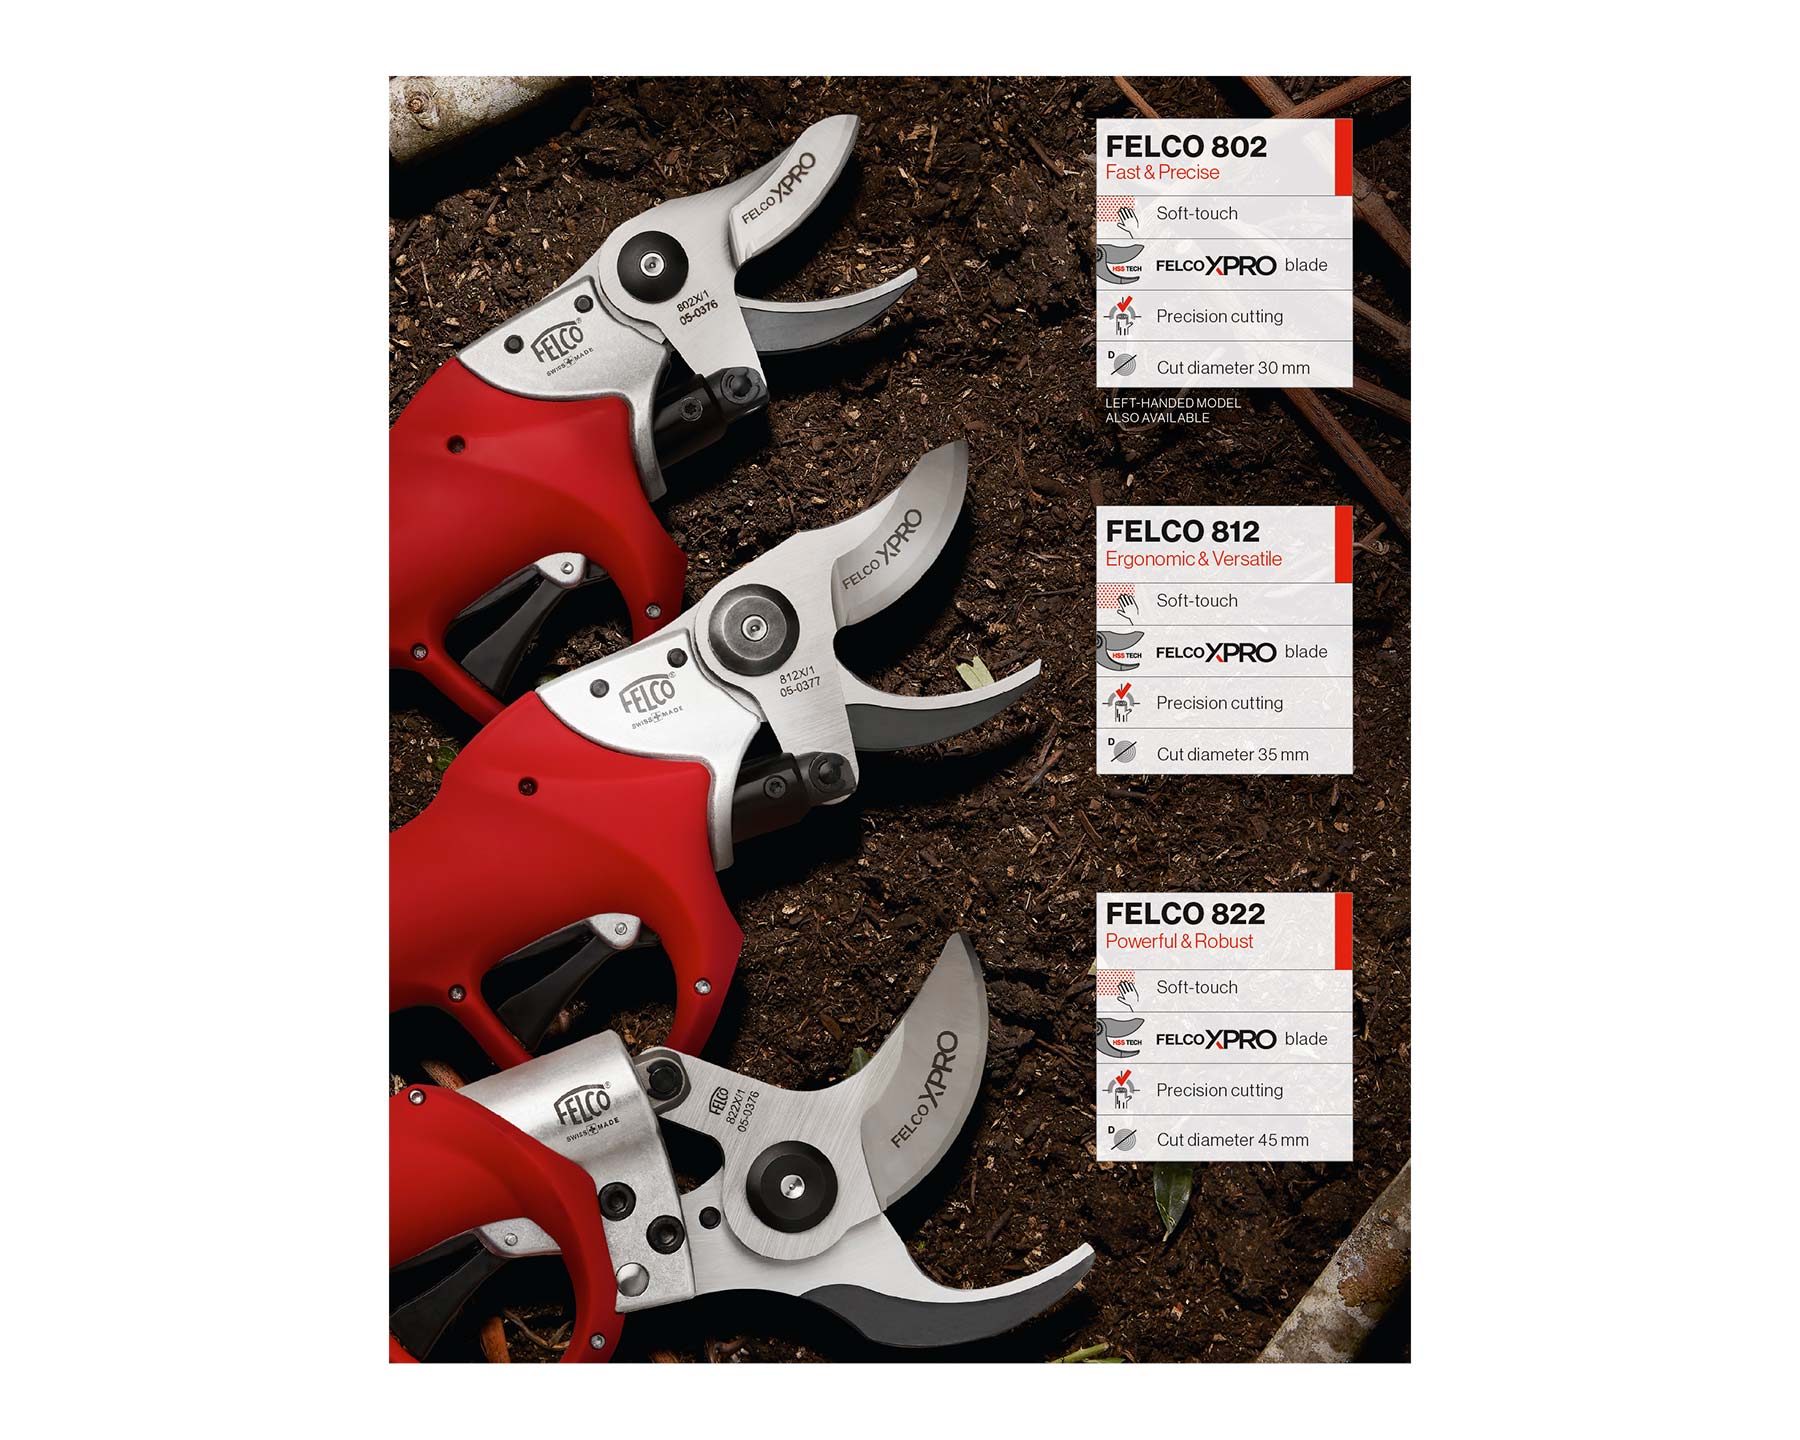 Comparison of the Felco Powerblade handpieces - each designed for different tasks